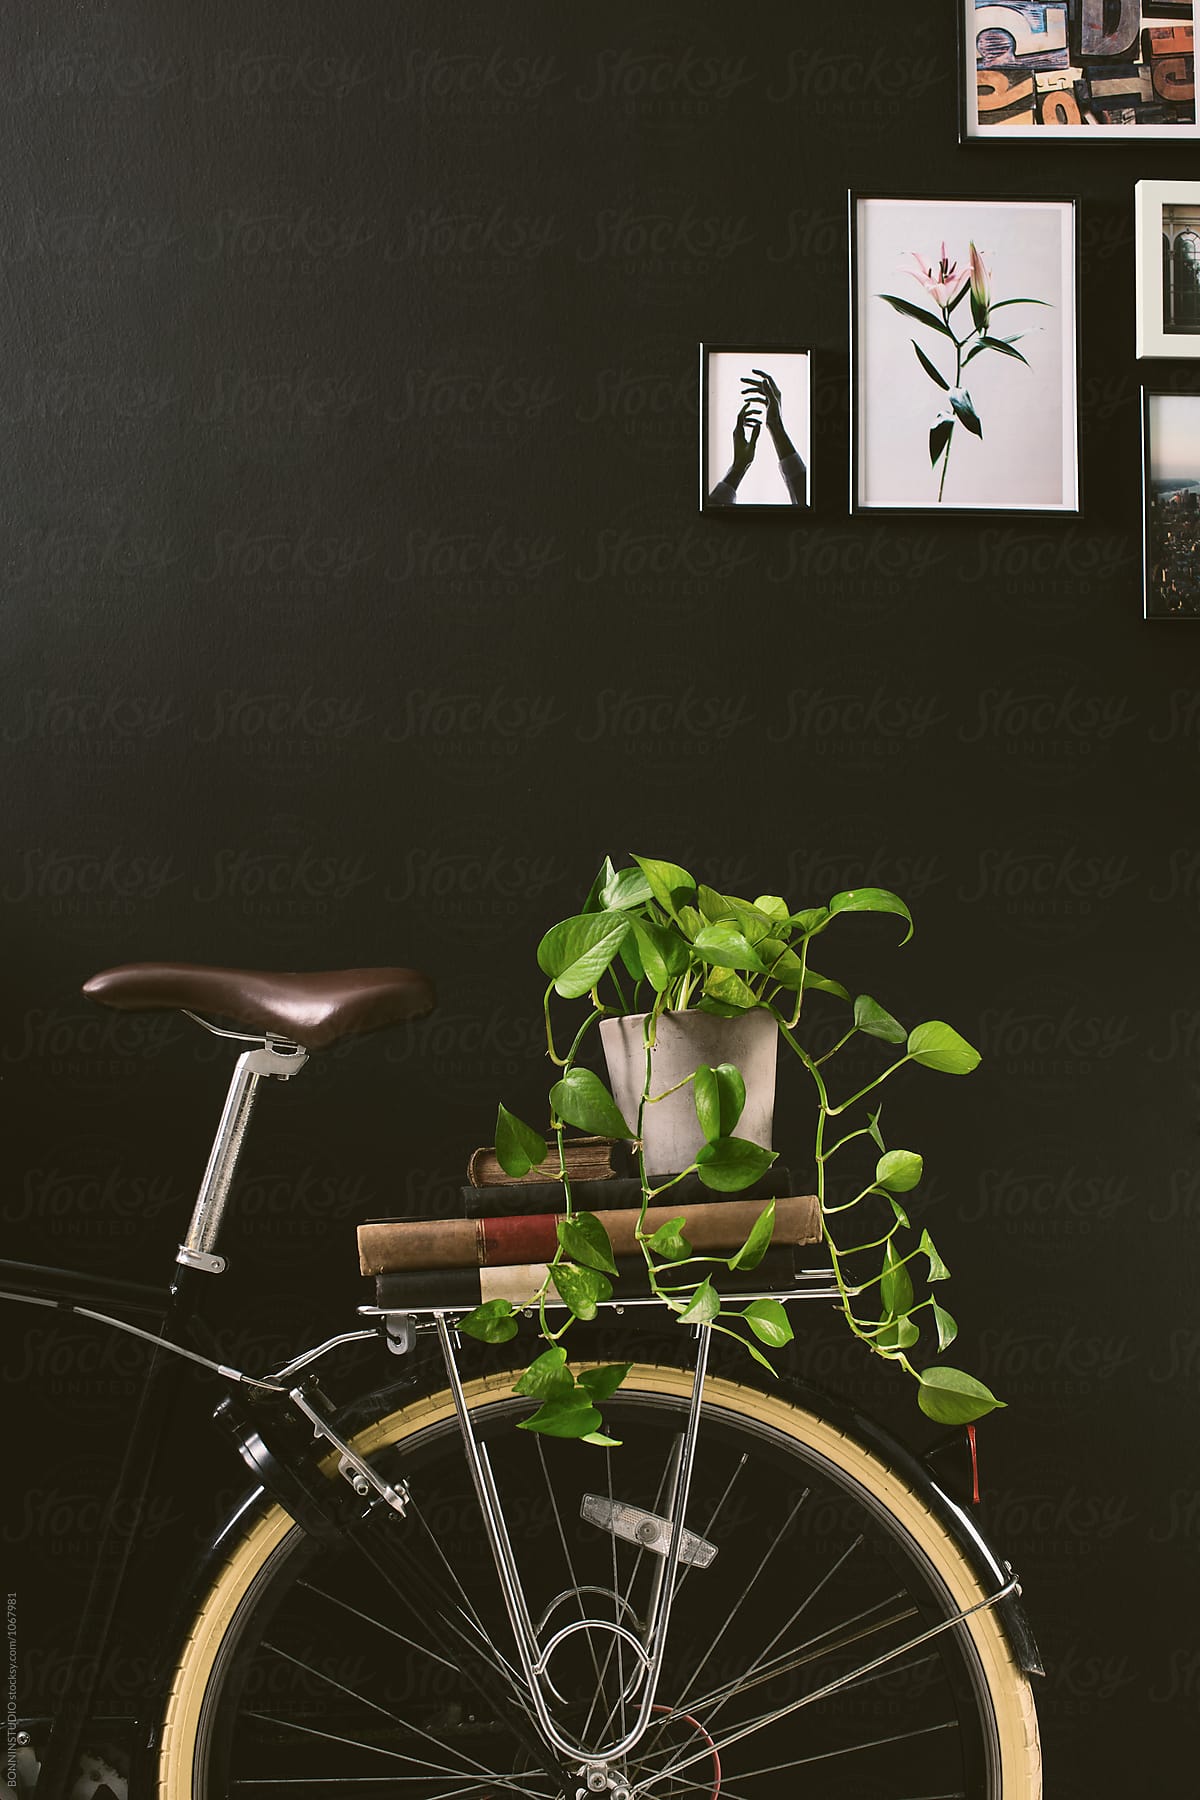 Closeup of a bicycle holding books and a plant on black wall.